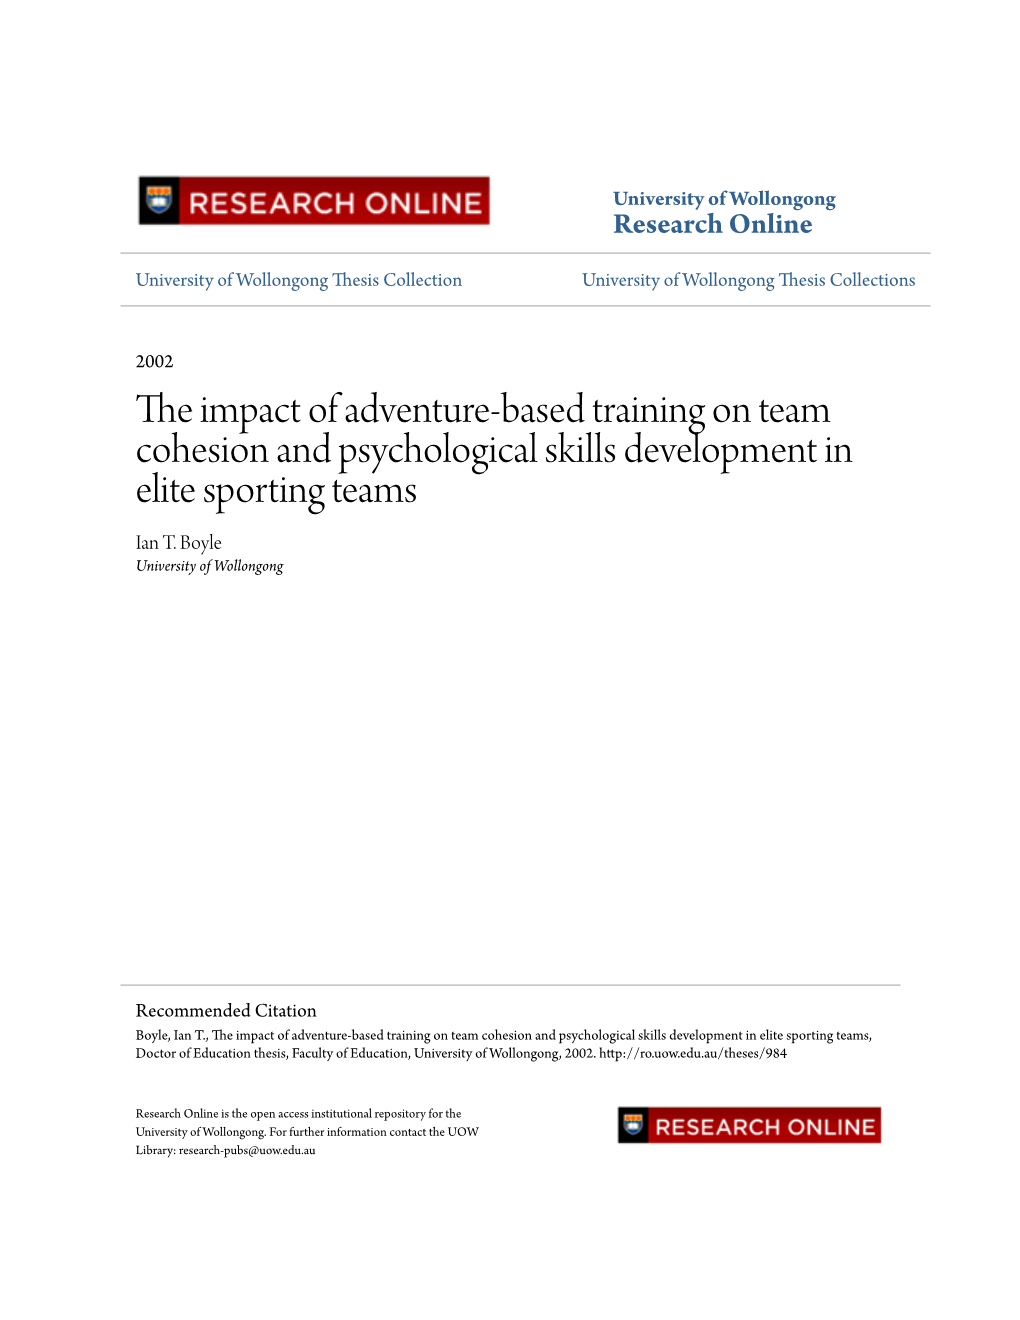 The Impact of Adventure-Based Training on Team Cohesion and Psychological Skills Development in Elite Sporting Teams Ian T